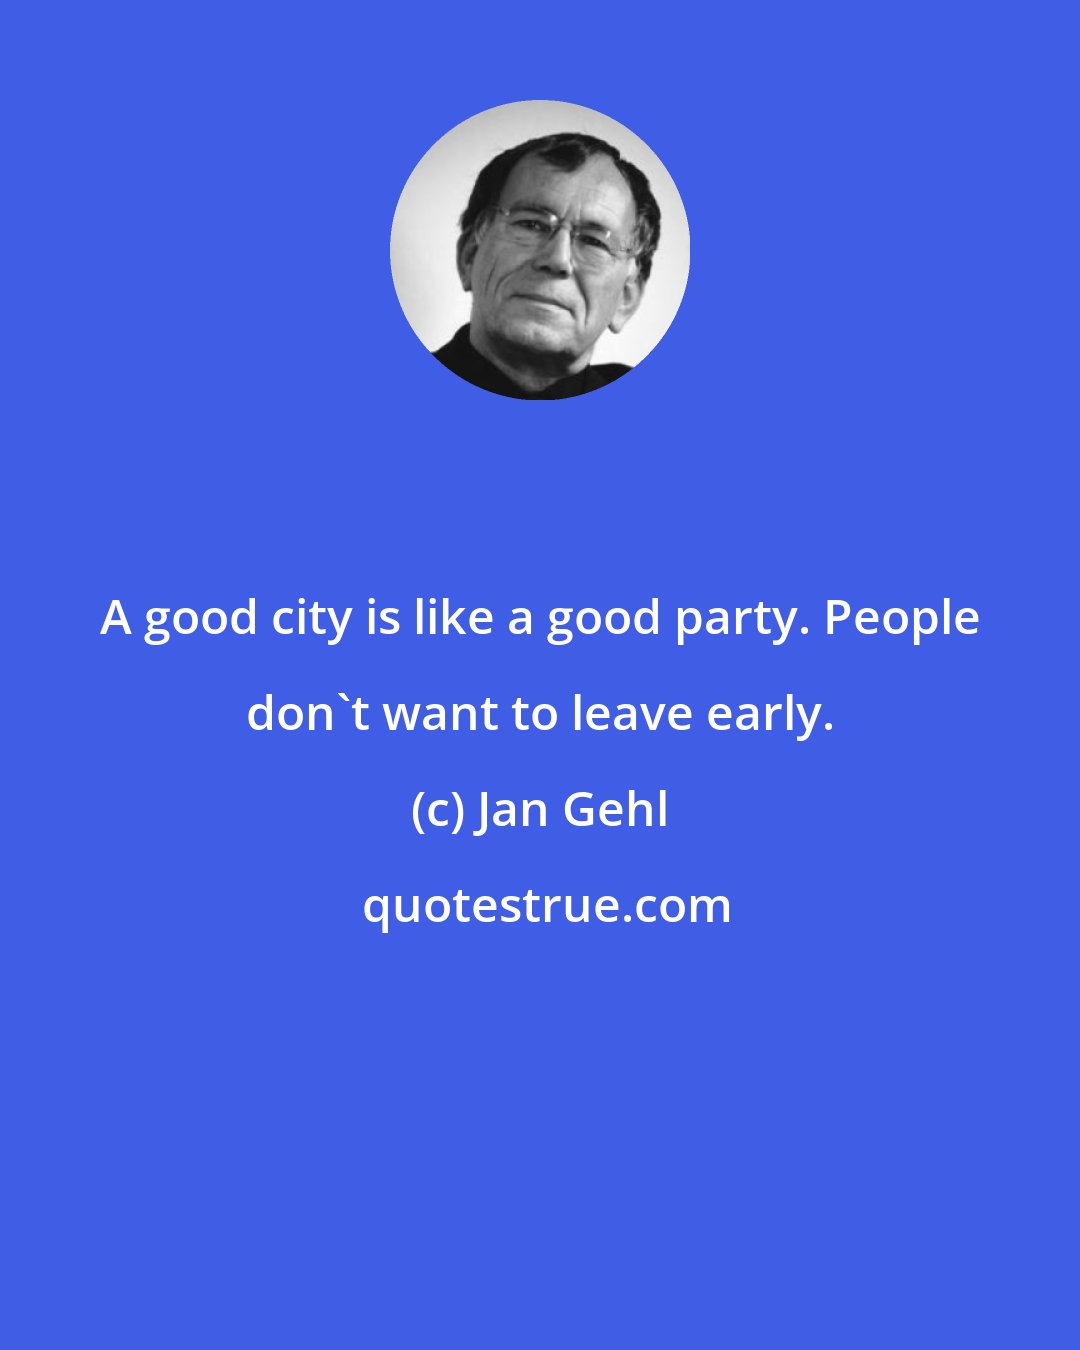 Jan Gehl: A good city is like a good party. People don't want to leave early.